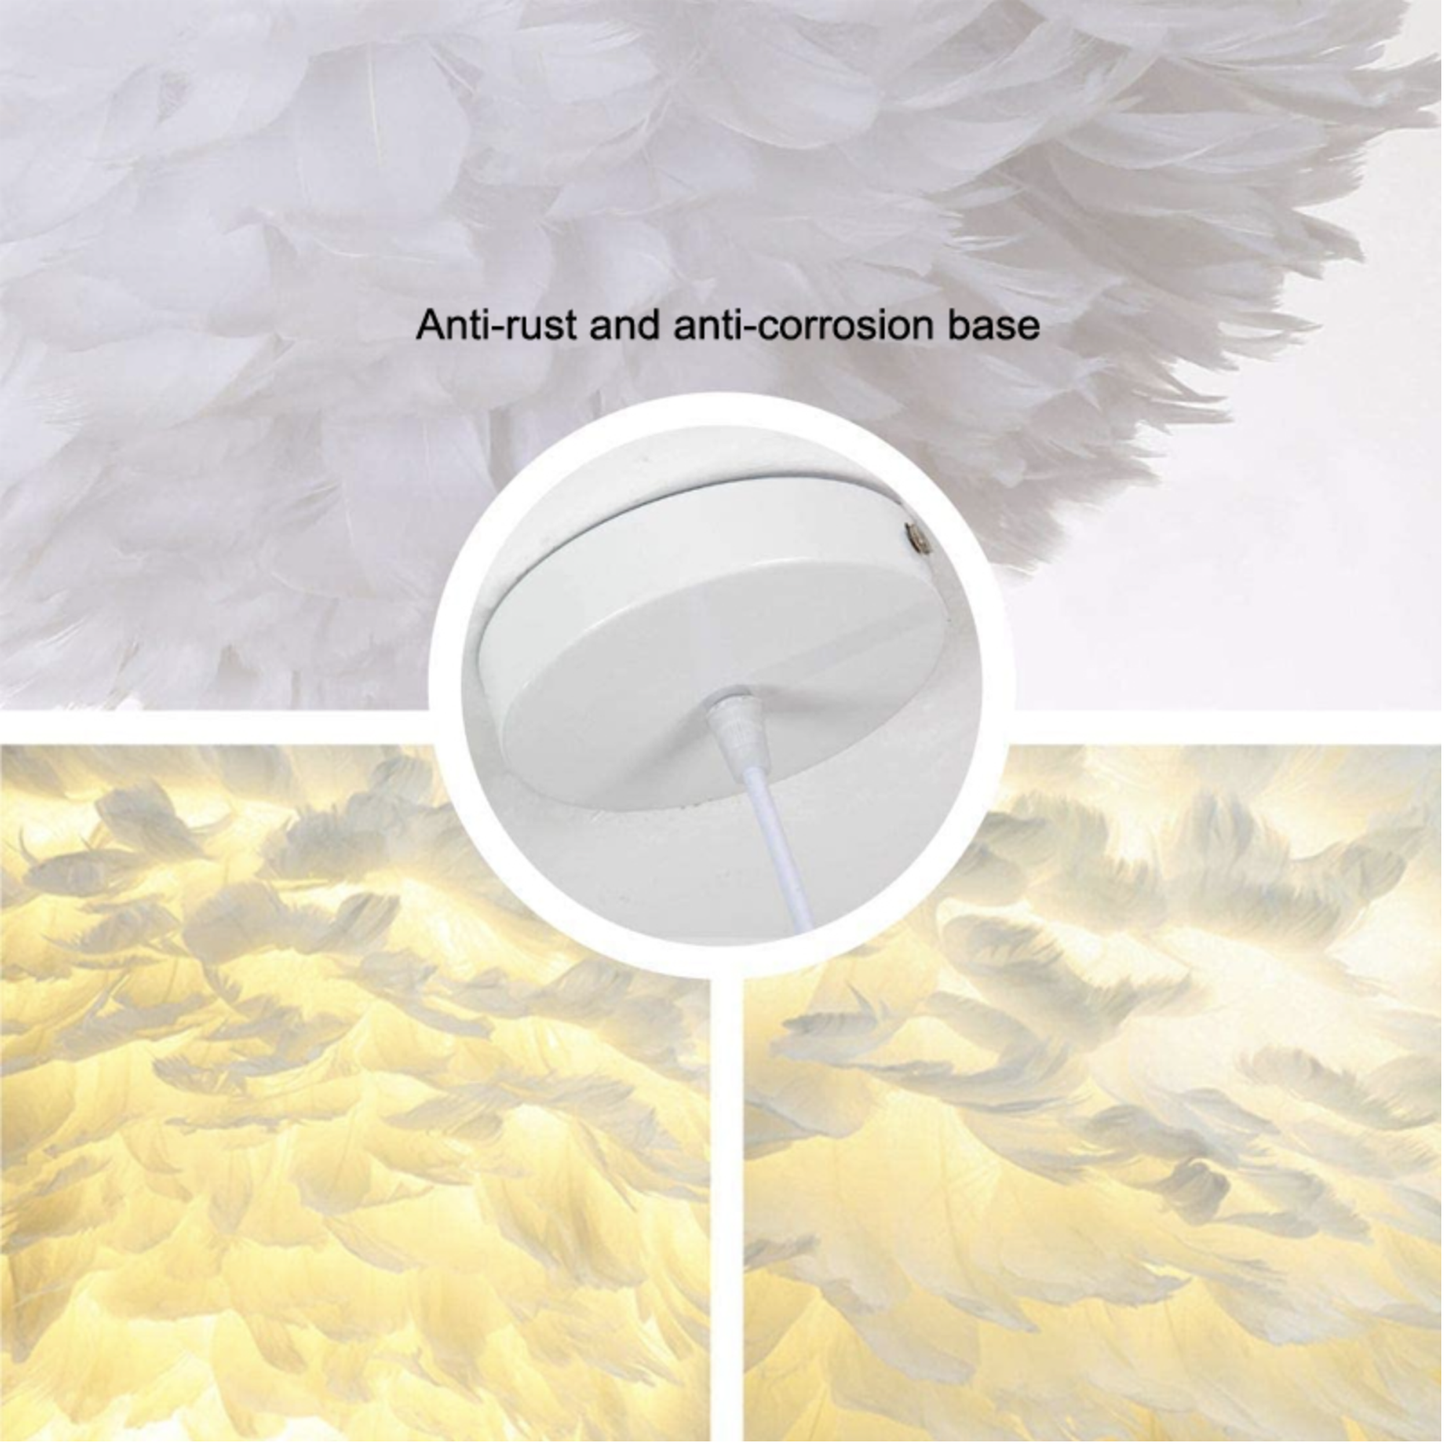 Swan Feather Pendant, ceiling light, lamp